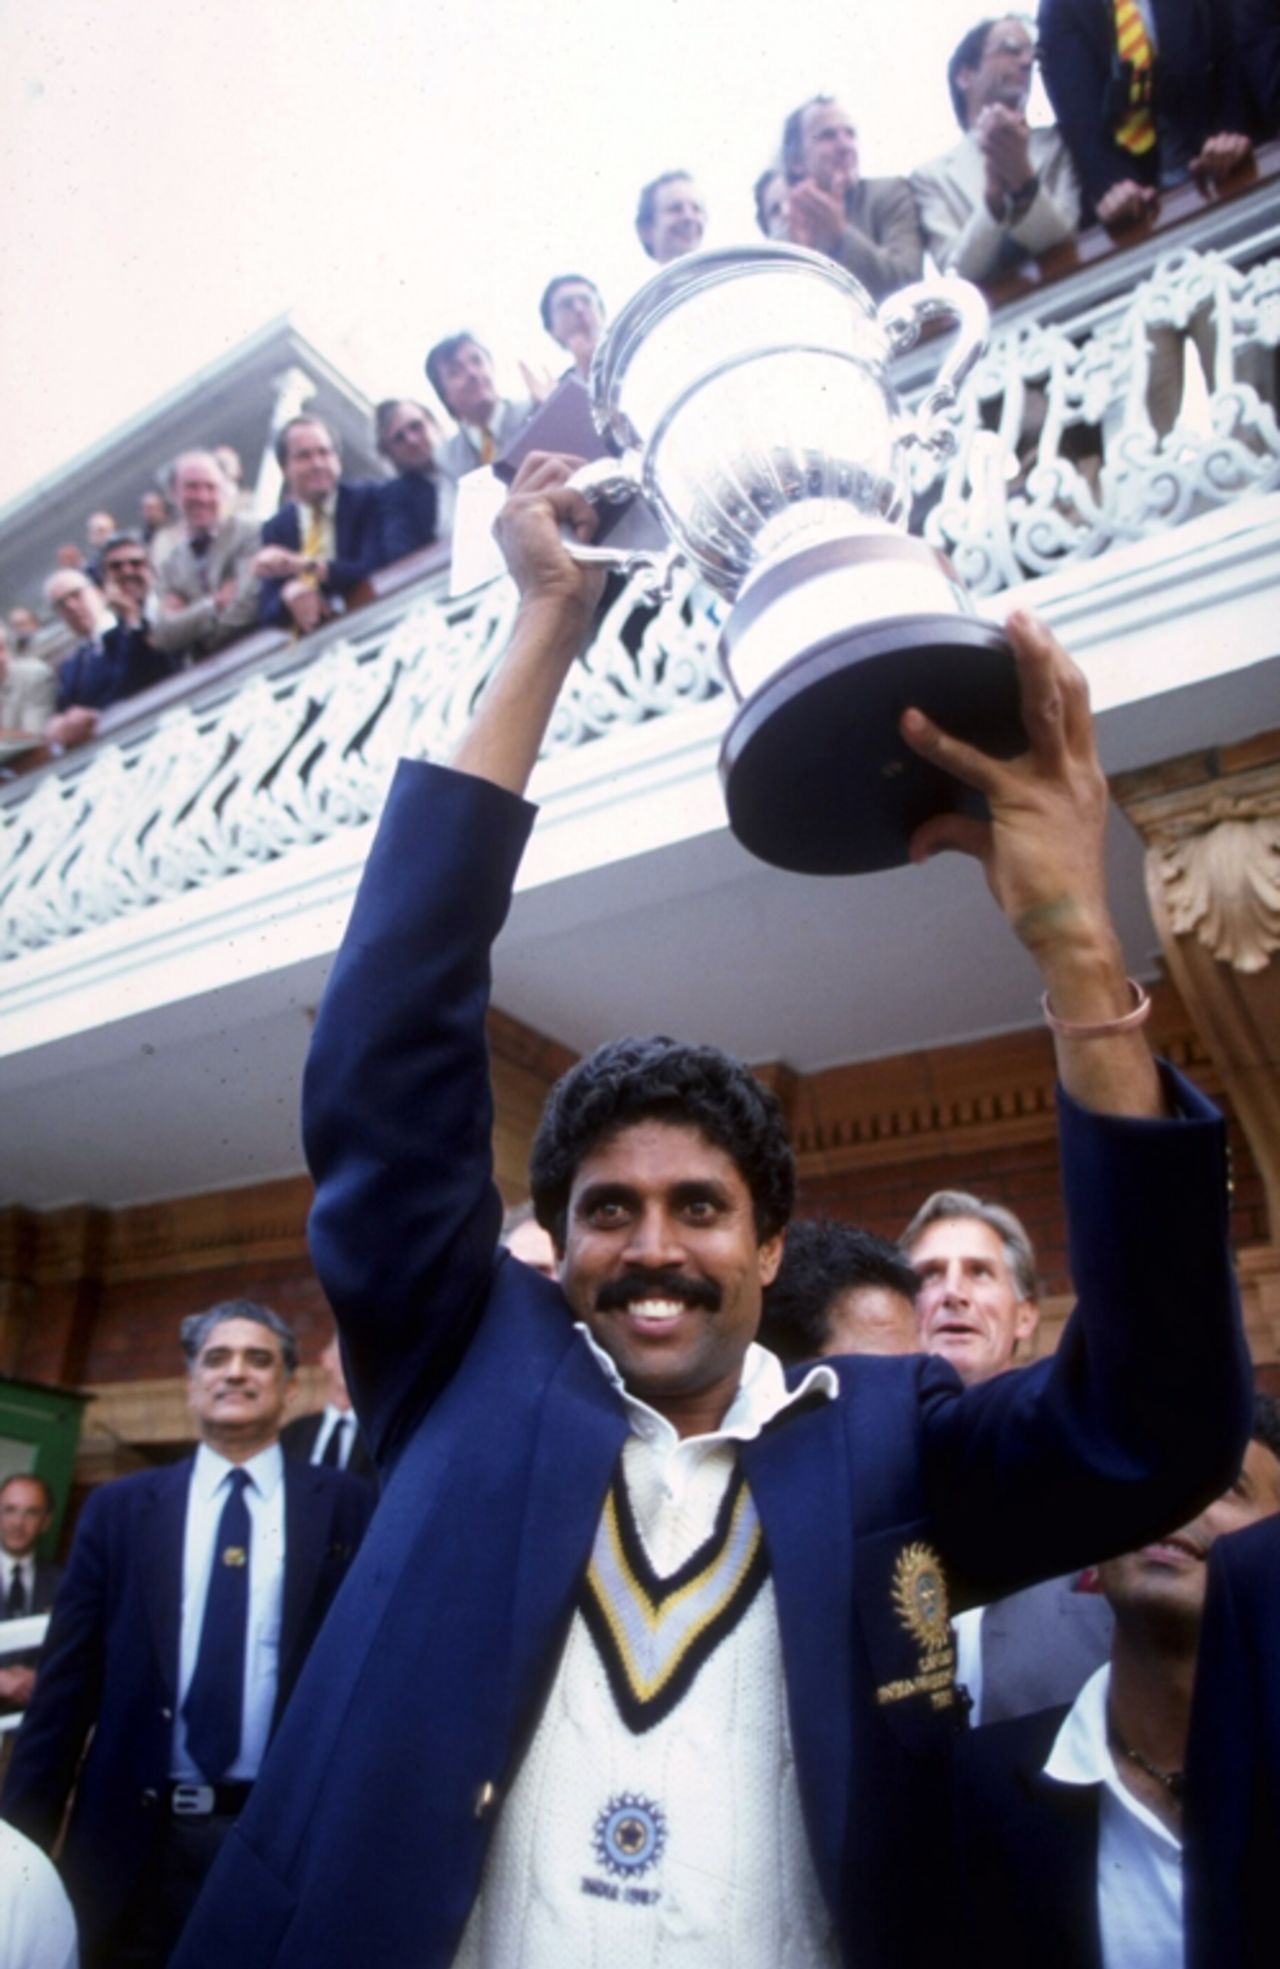 Kapil Dev lifts the World Cup after India's win, June 25, 1983